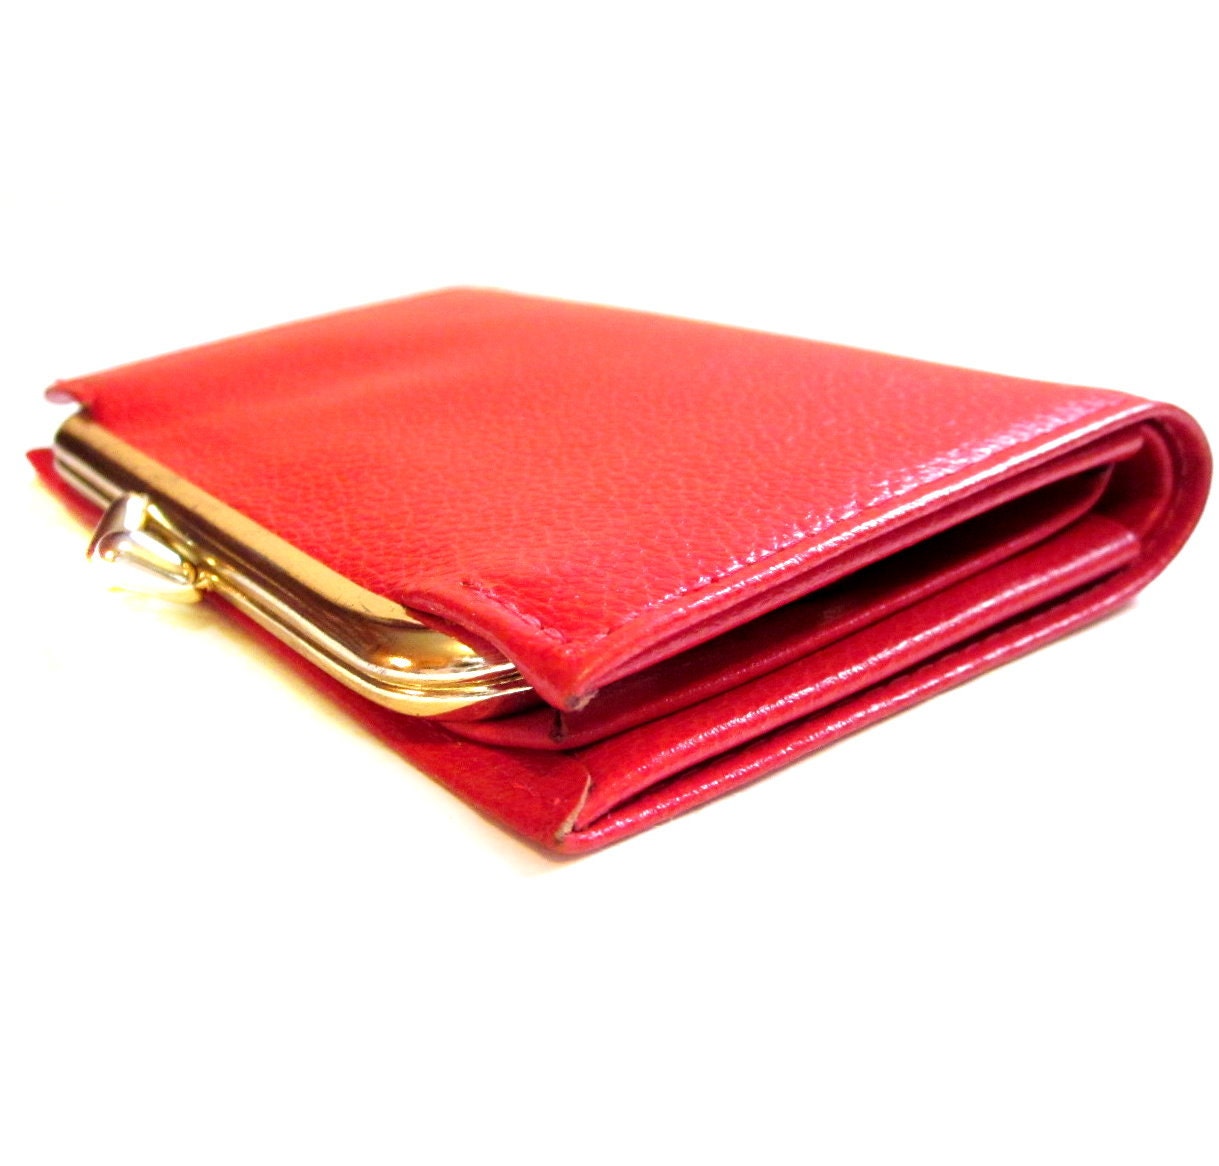 Vintage Red Leather Wallet Clutch Coin Purse